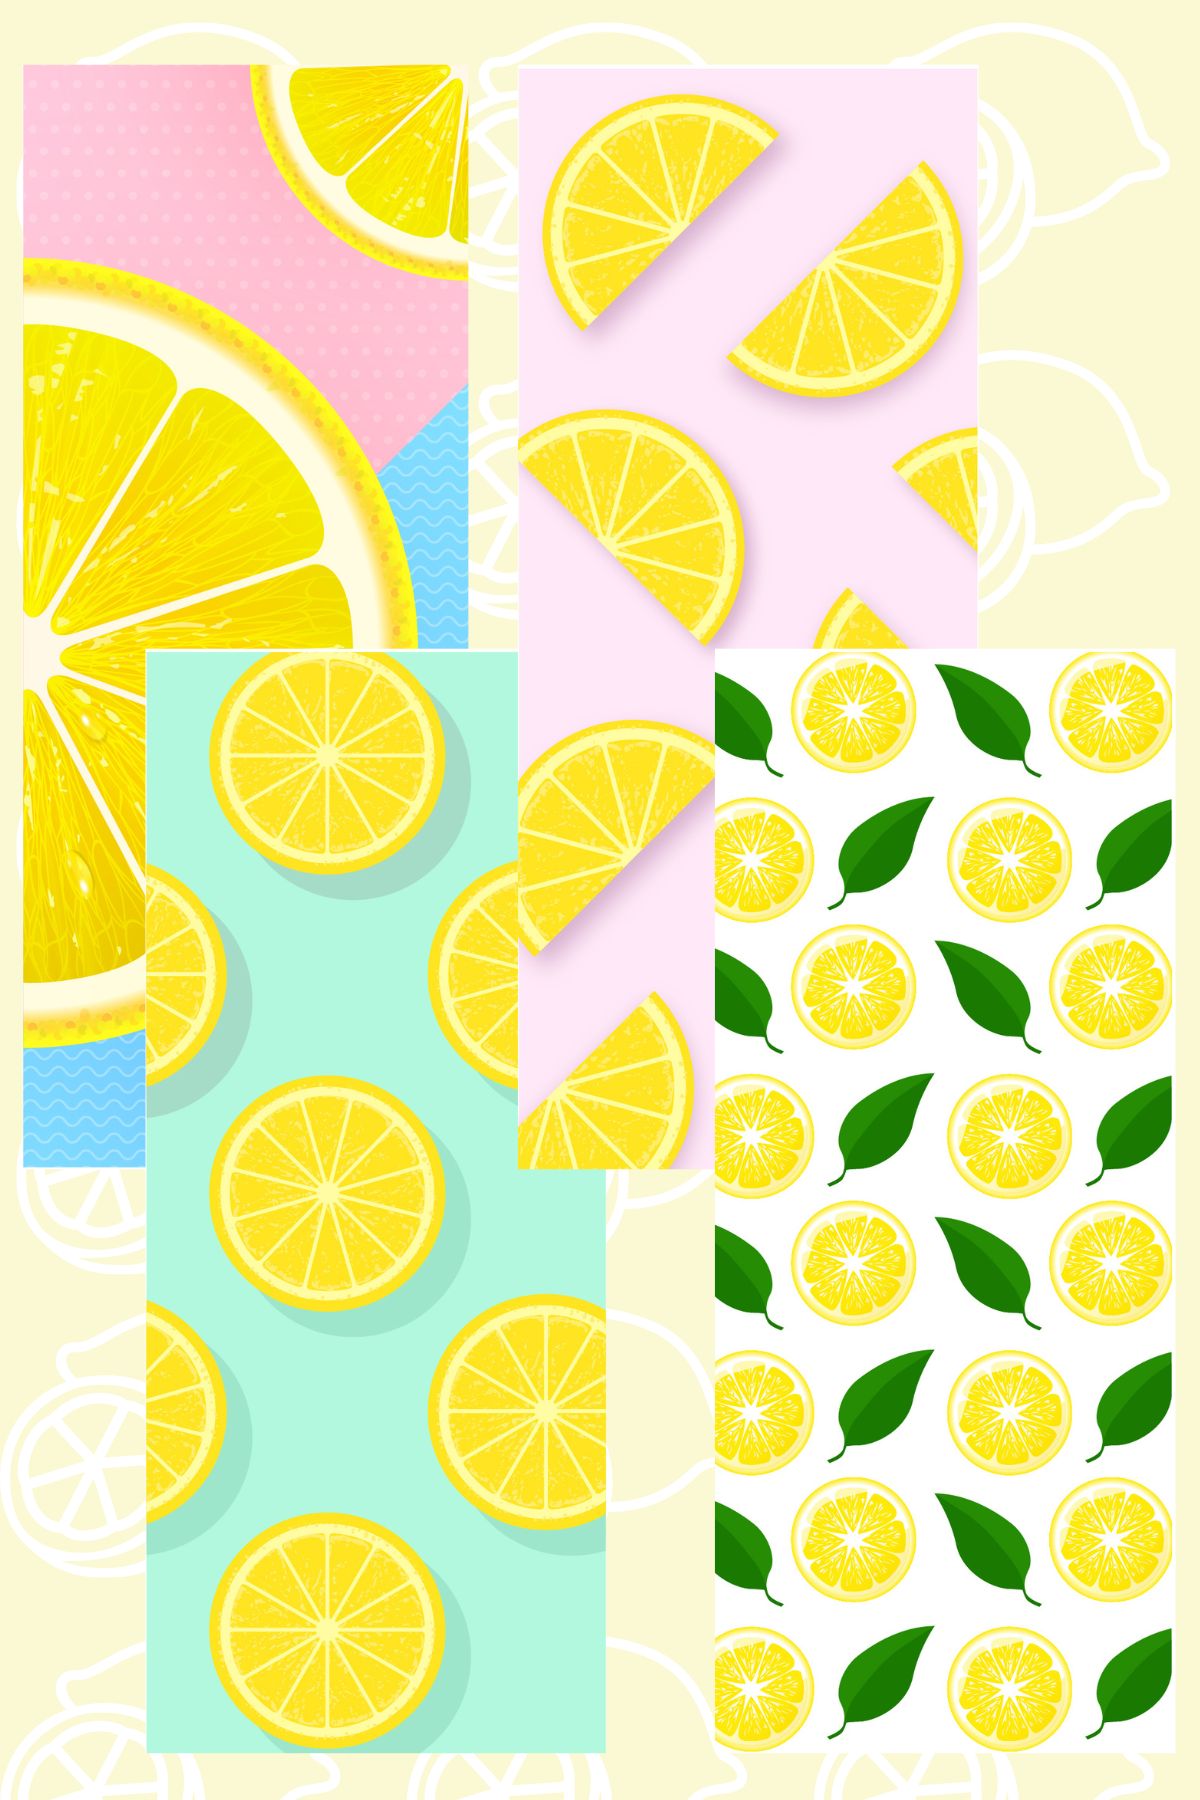 Four pastel-colored bookmarks with lemon slices on them, by Skip to my Lou.